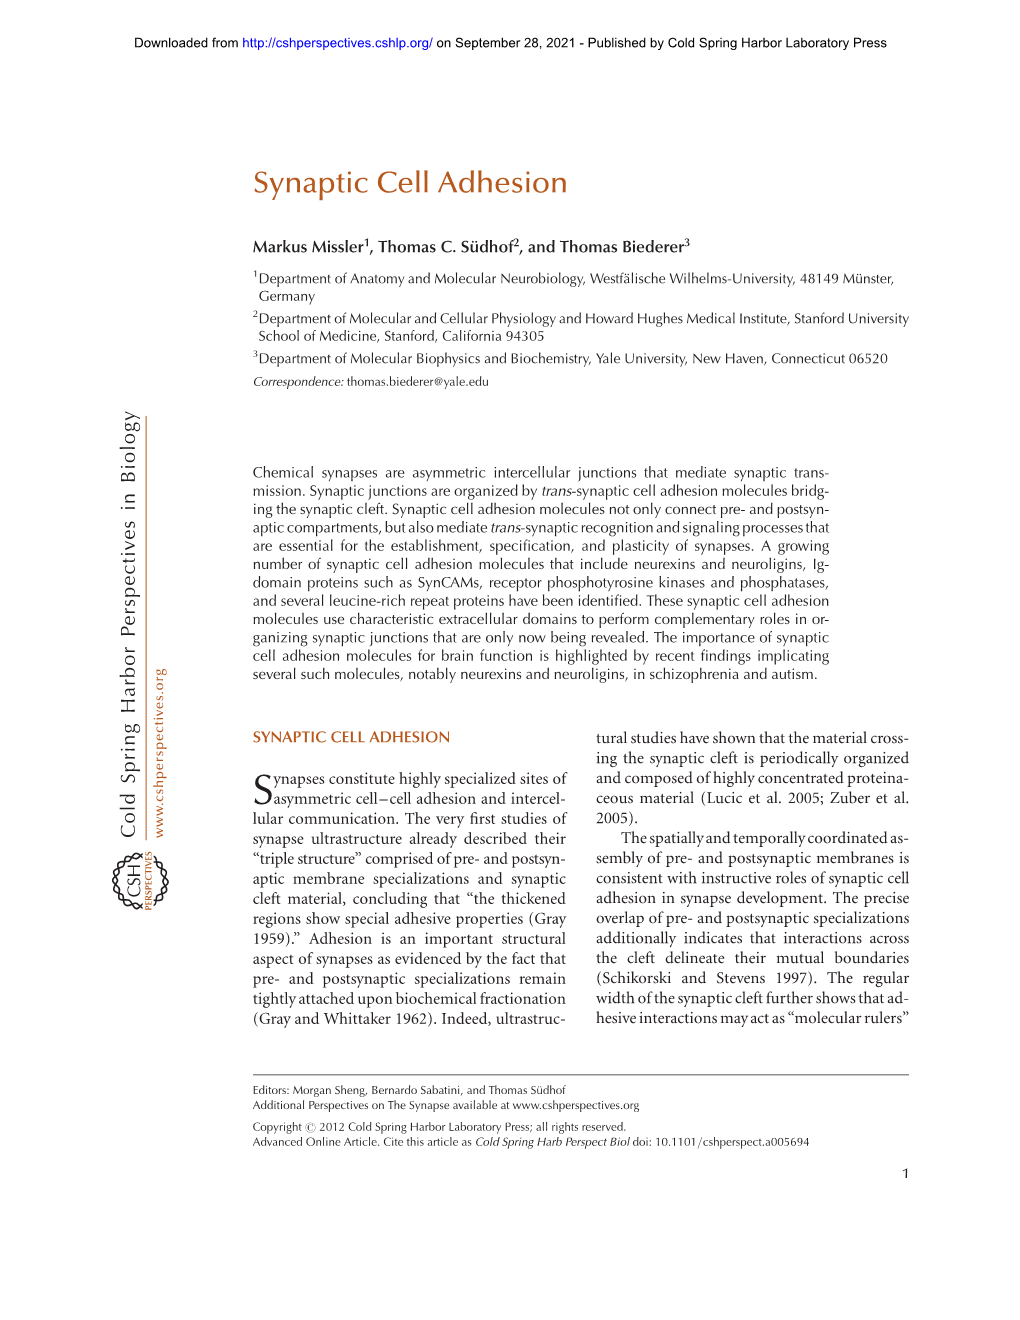 Synaptic Cell Adhesion